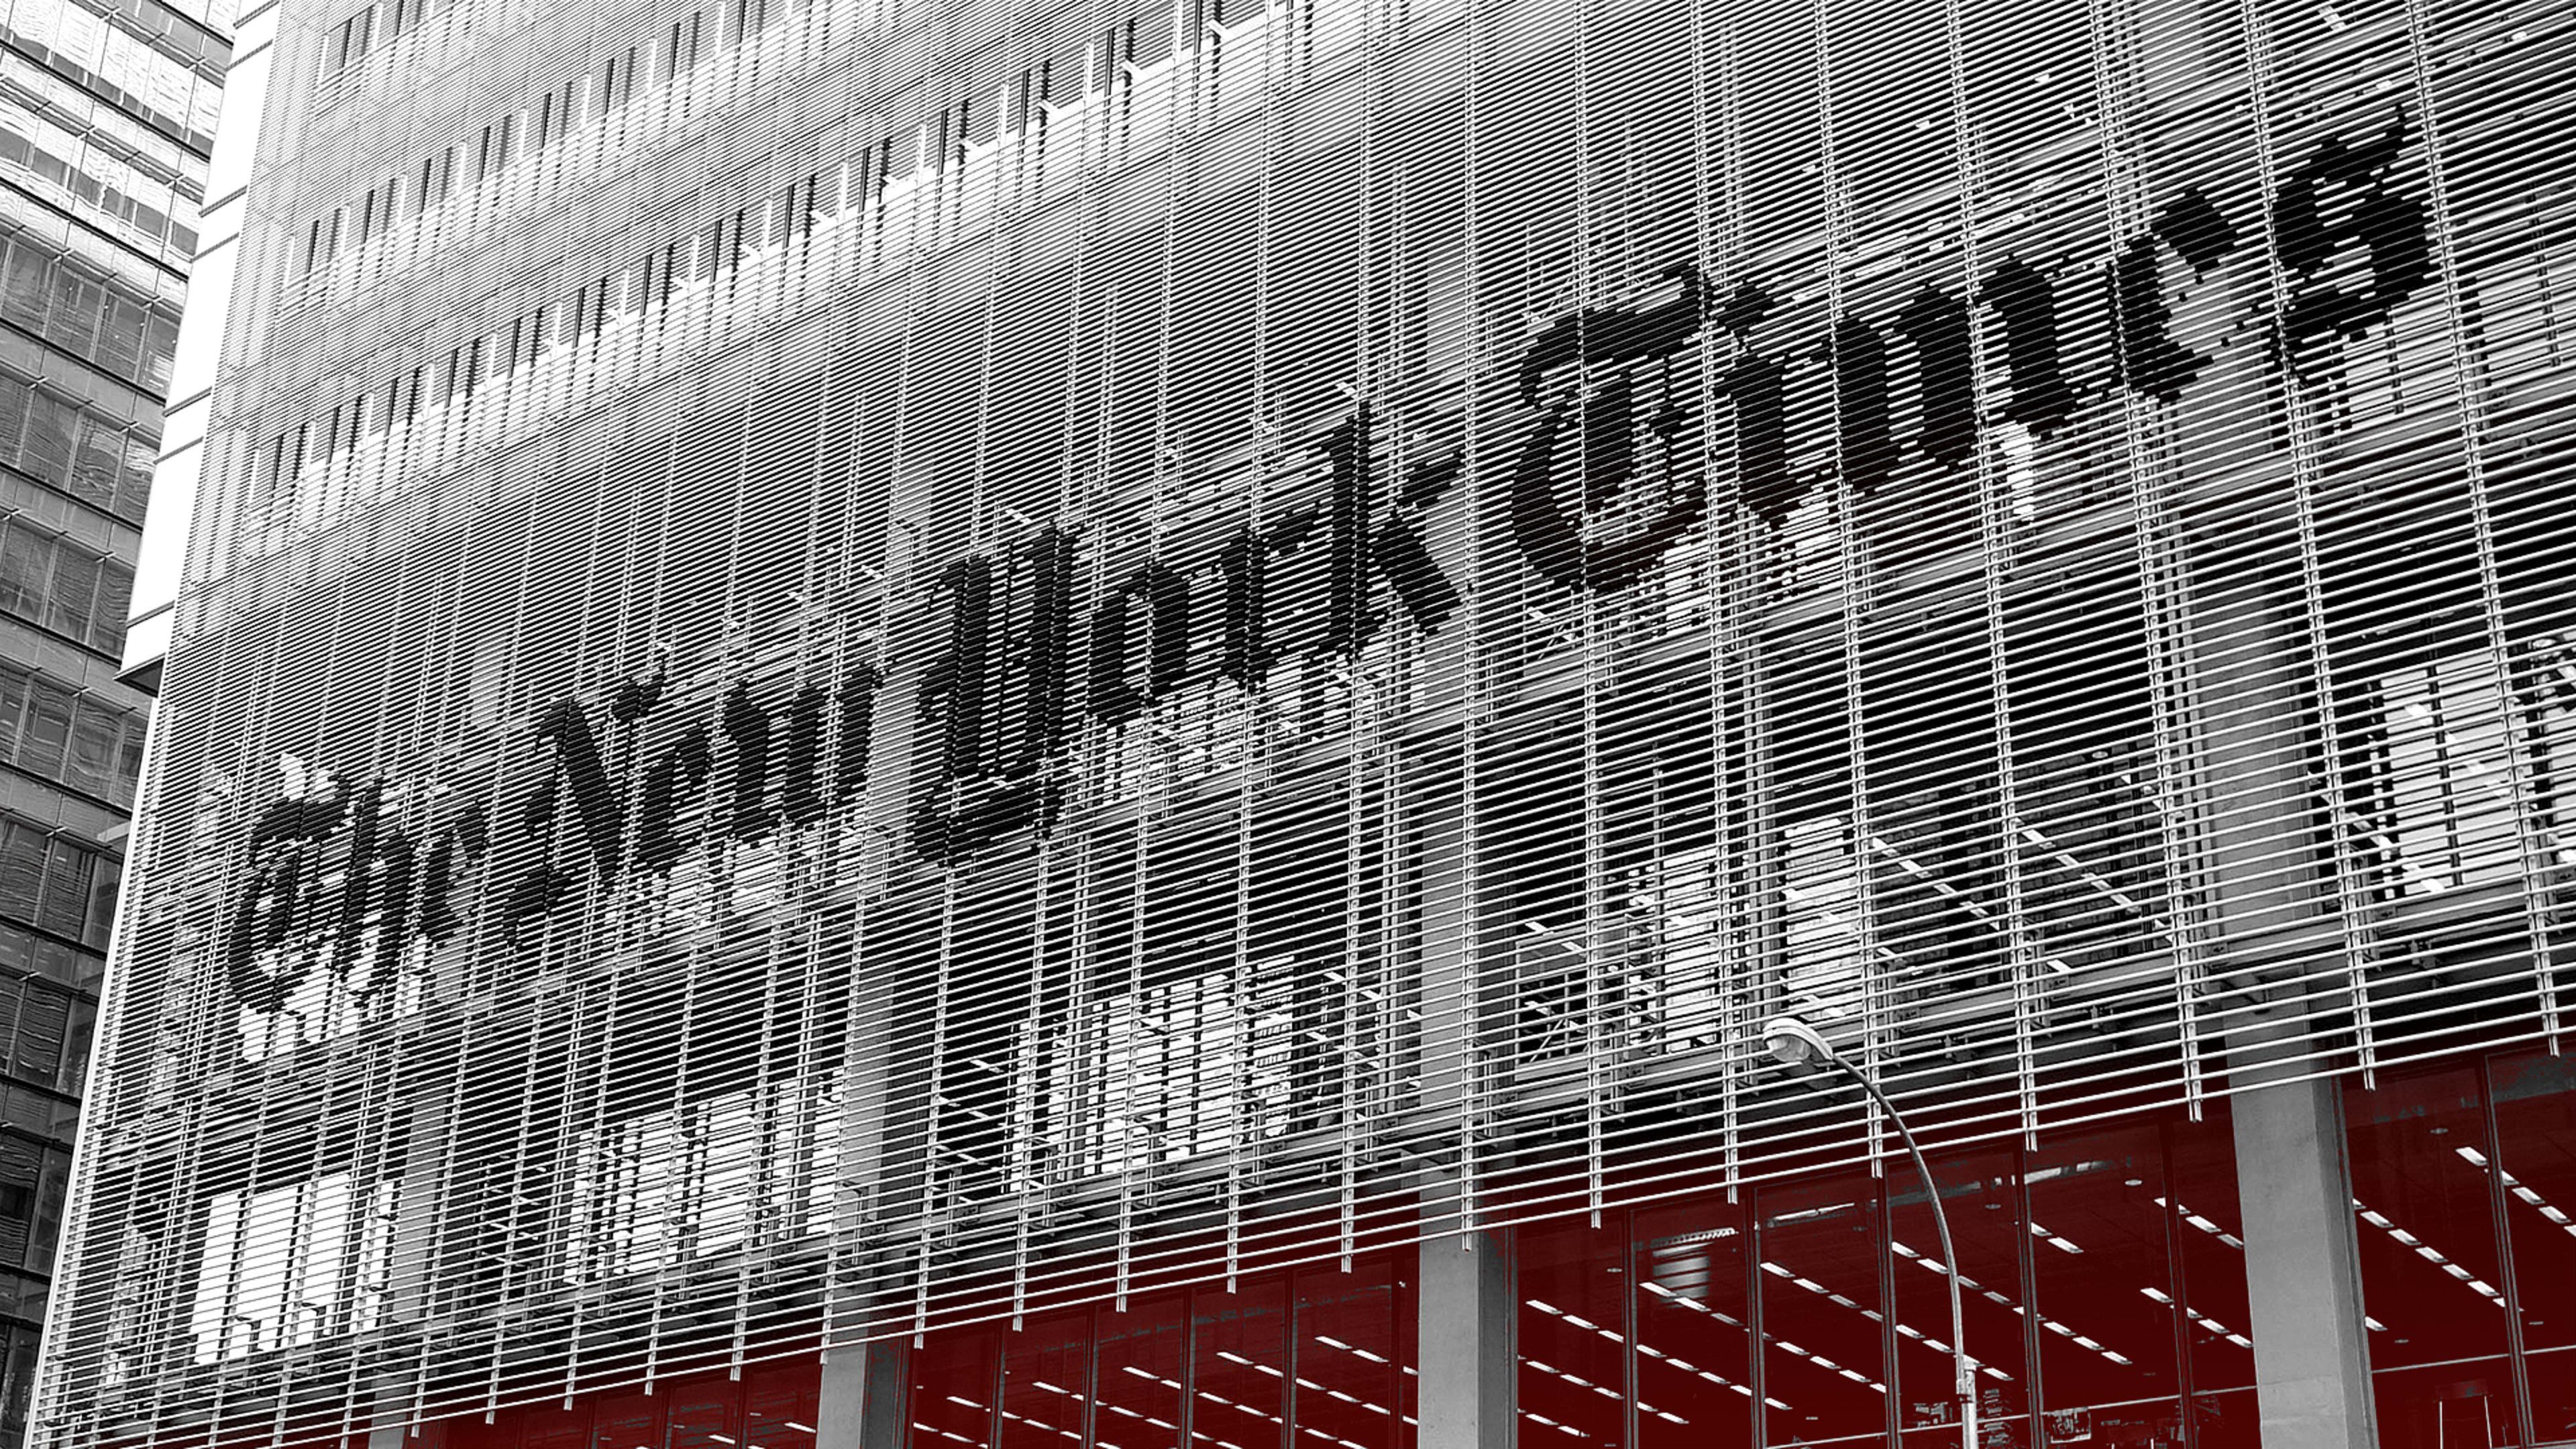 The Verge’s defense of Sarah Jeong highlights what the New York Times got wrong